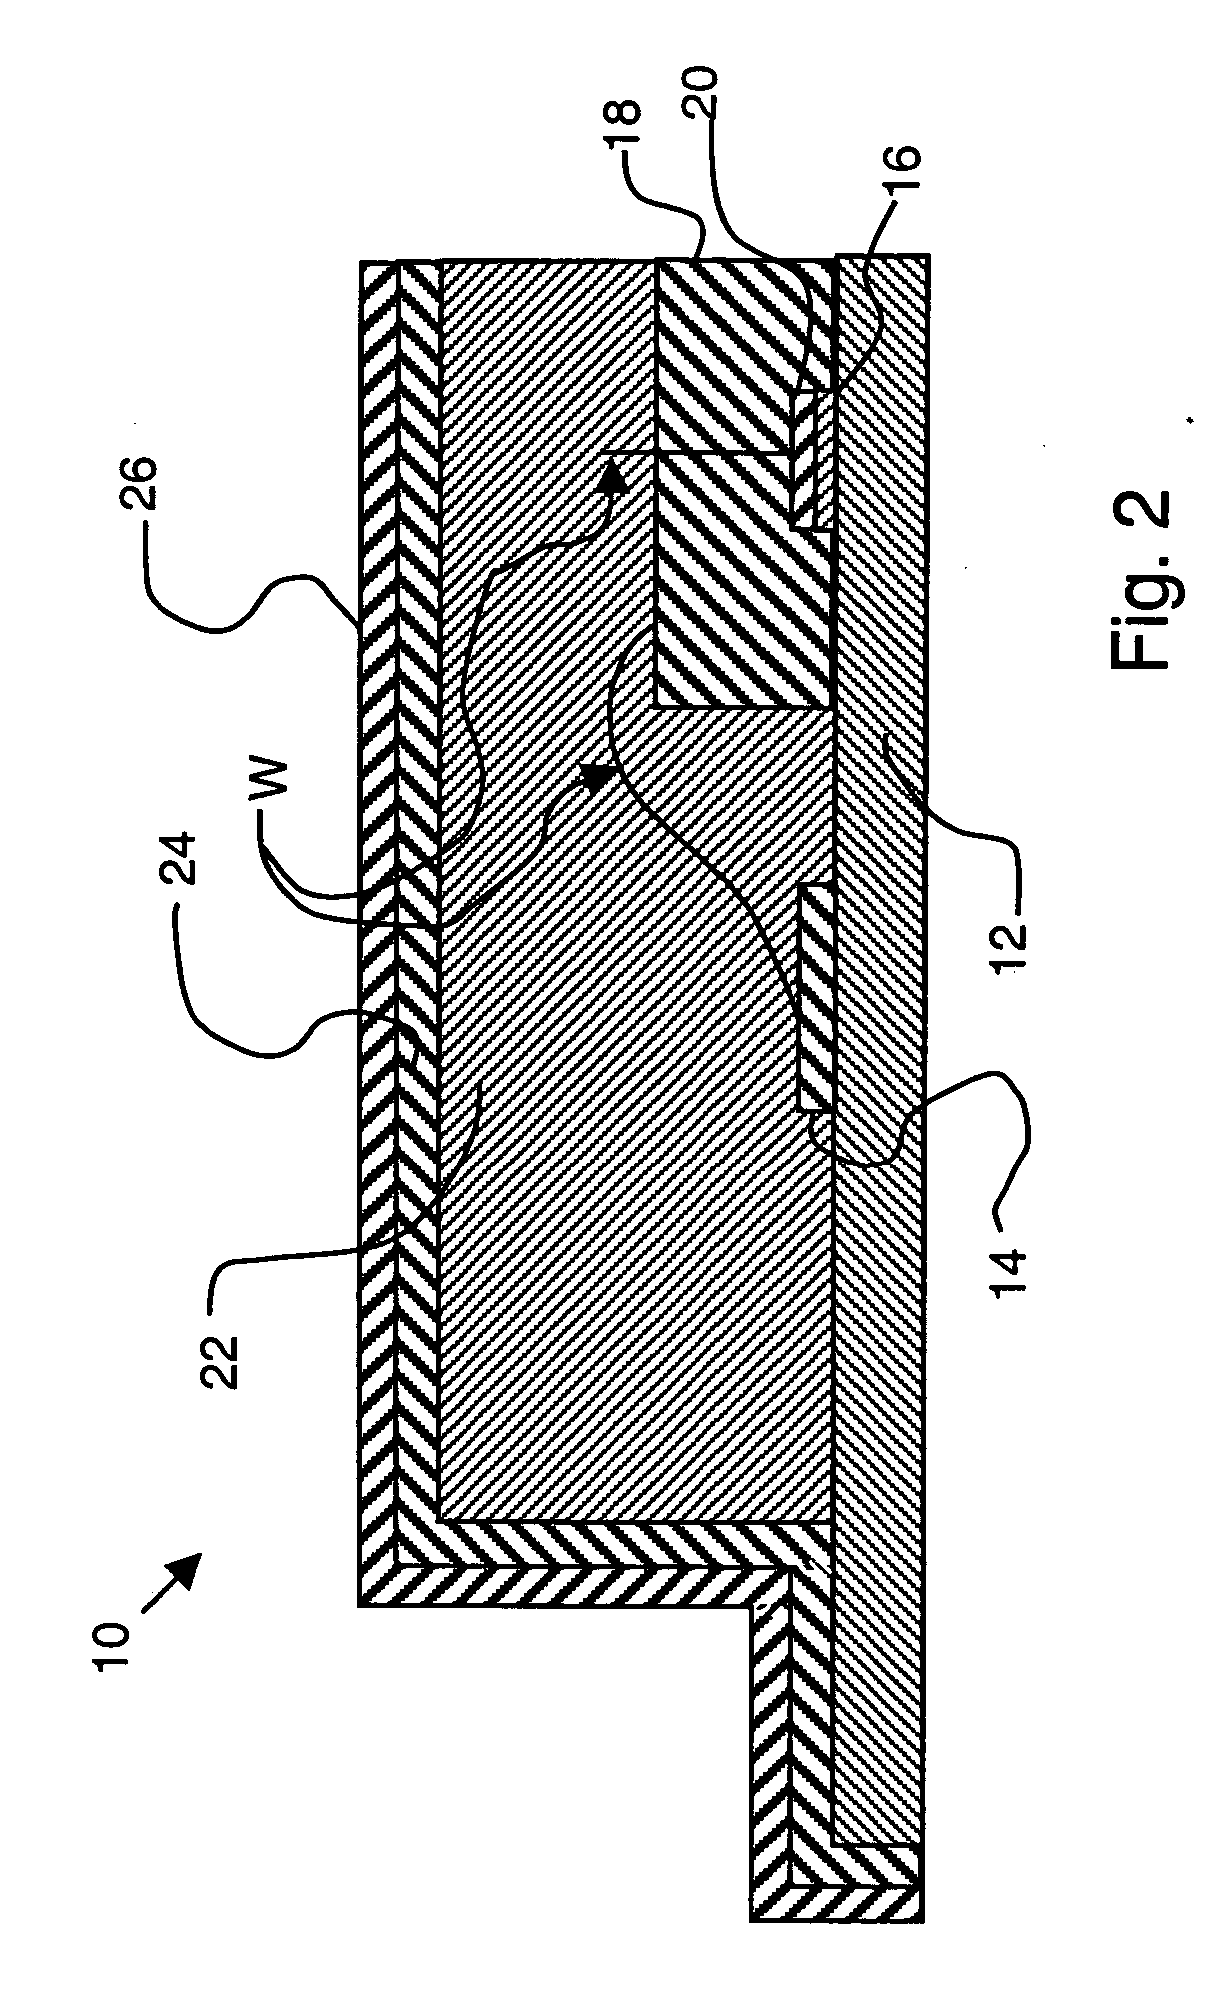 Curable encapsulant composition, device including same, and associated method